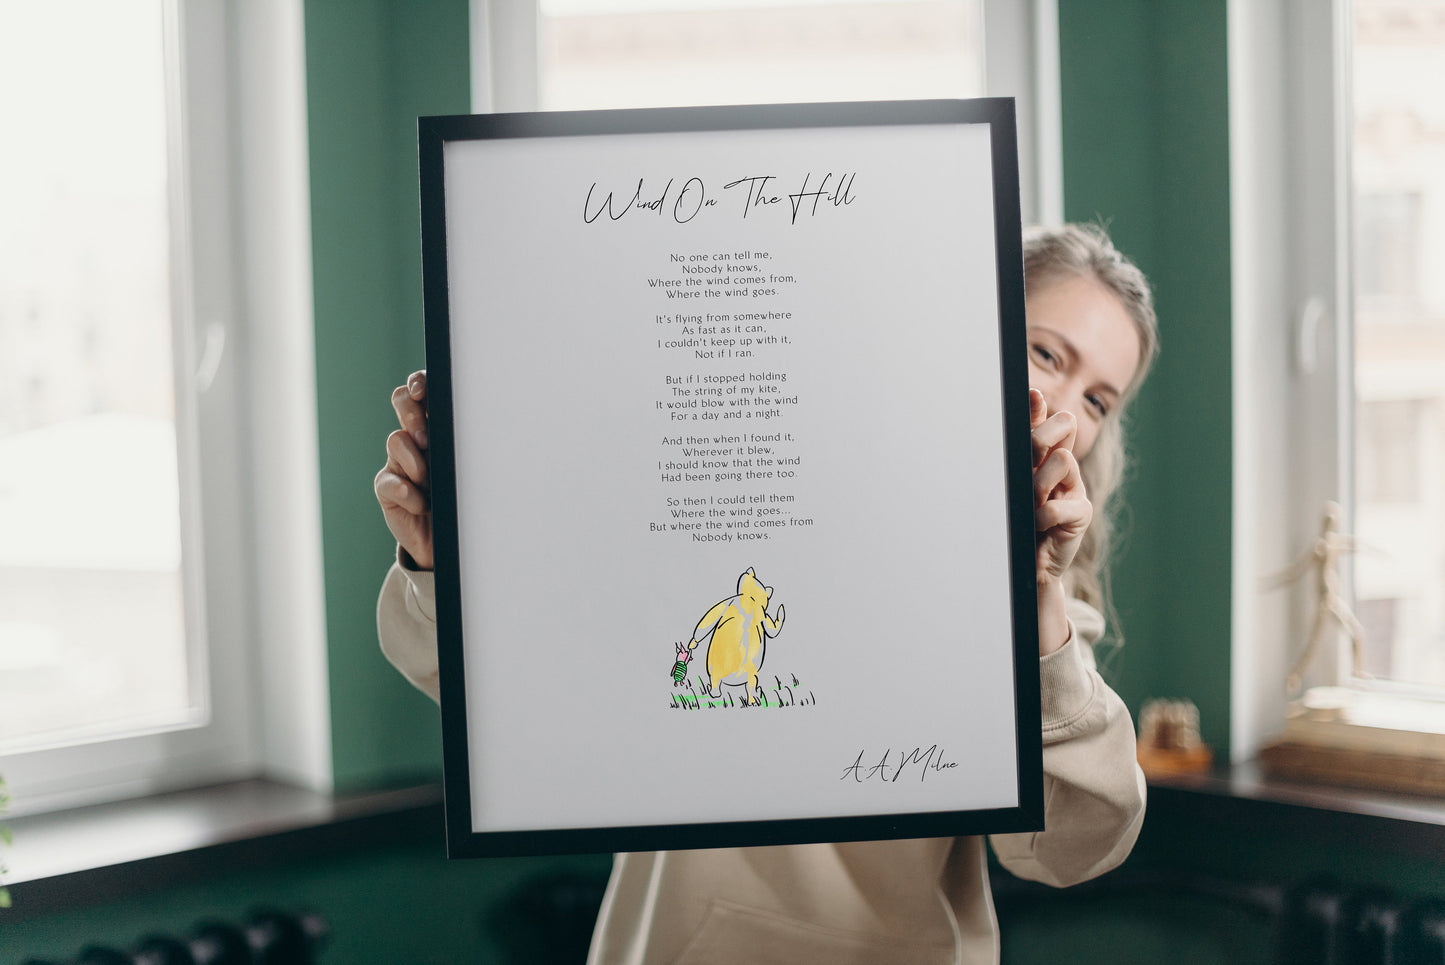 Wind on the hill by AA Milne Print - Winnie the Pooh Nursery Print Framed New Baby Gift, Gender Neutral Baby Gift - Winnie the Pooh Poem